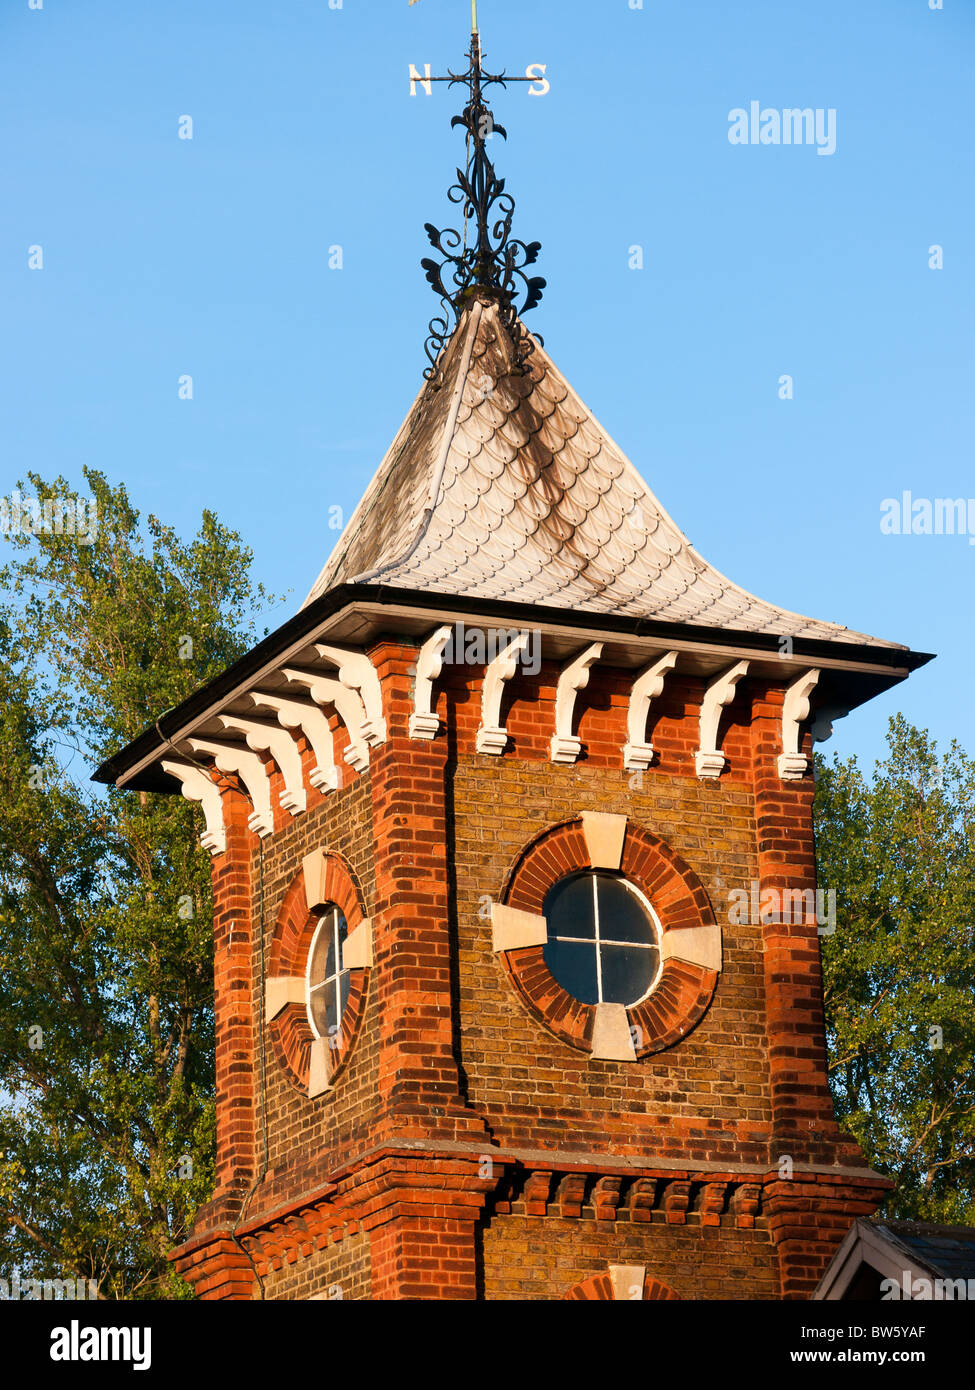 Old tower at Bulbourne on the Grand Union canal, Herts, UK Stock Photo